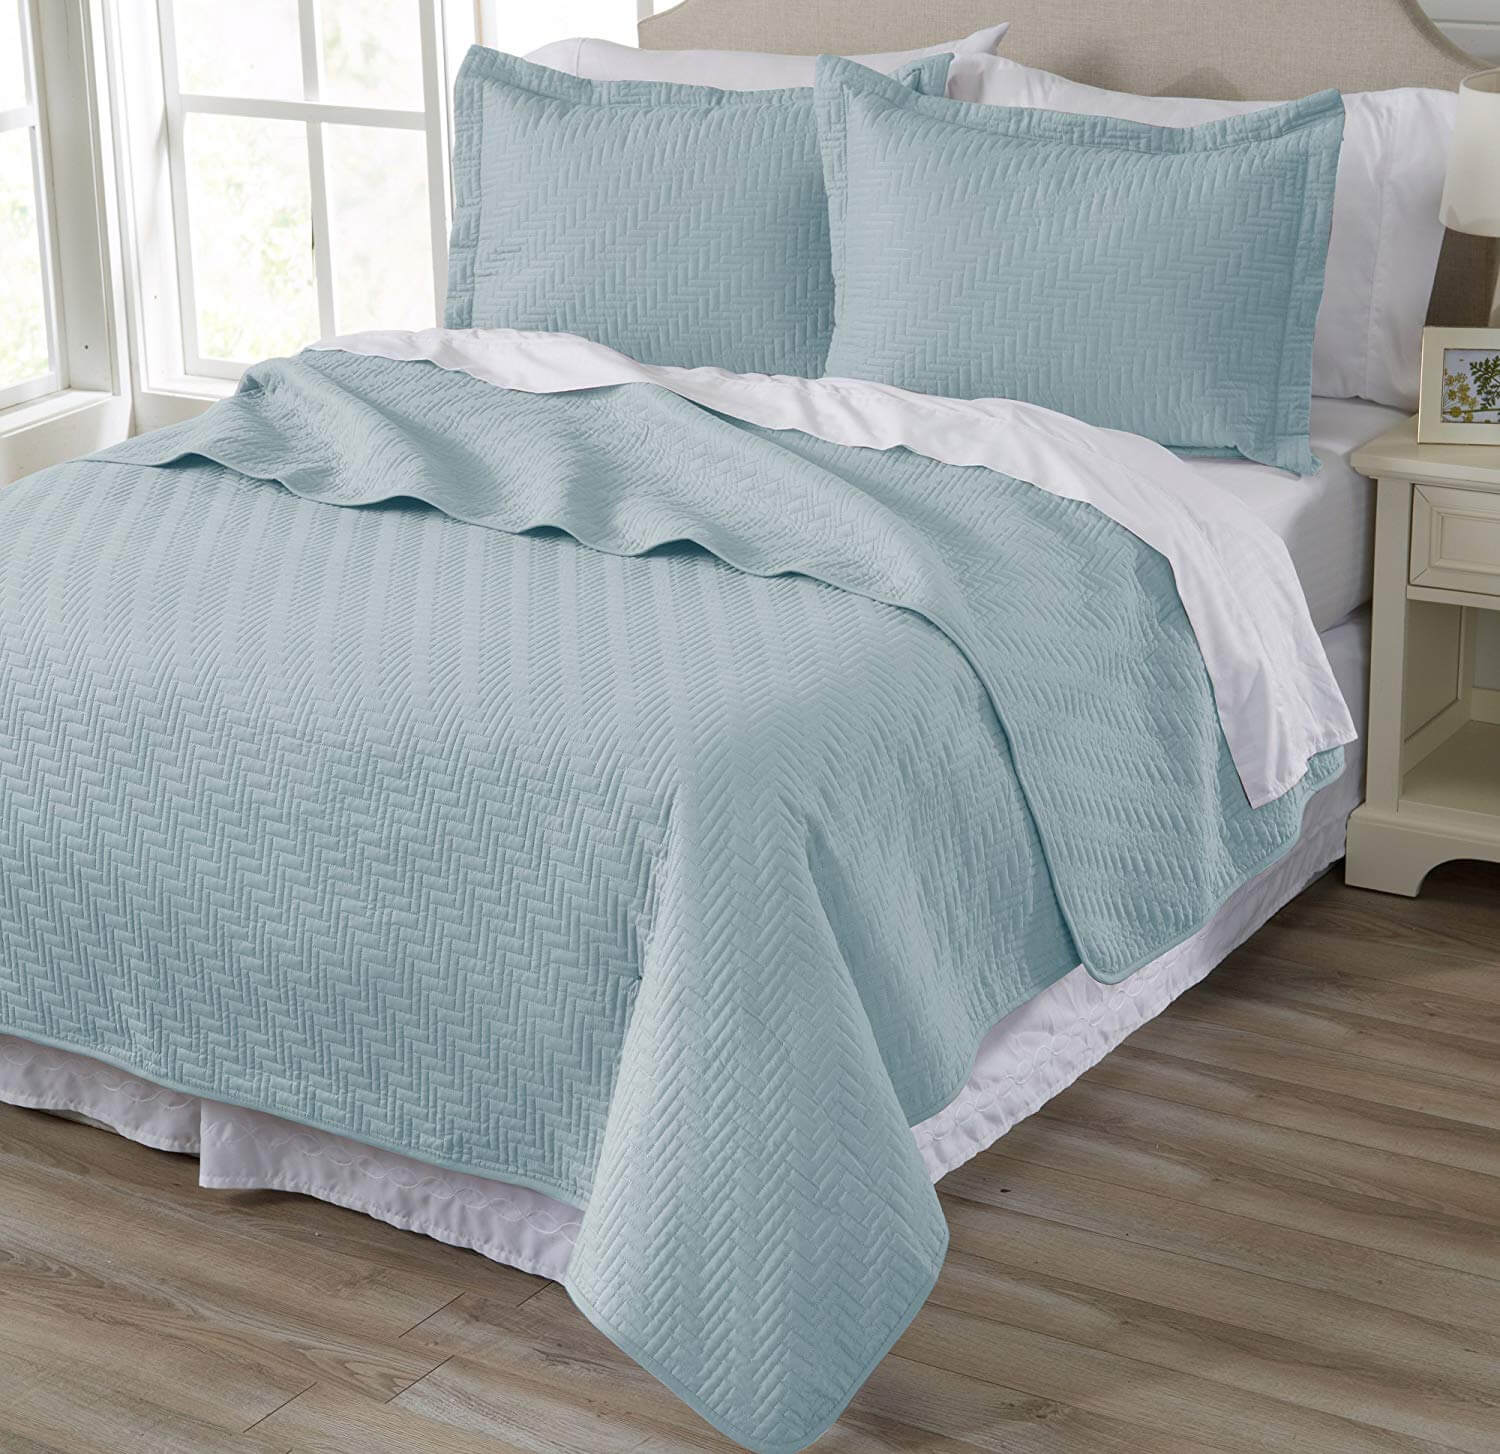 10. 3-Piece Luxury Quilt Set with Shams